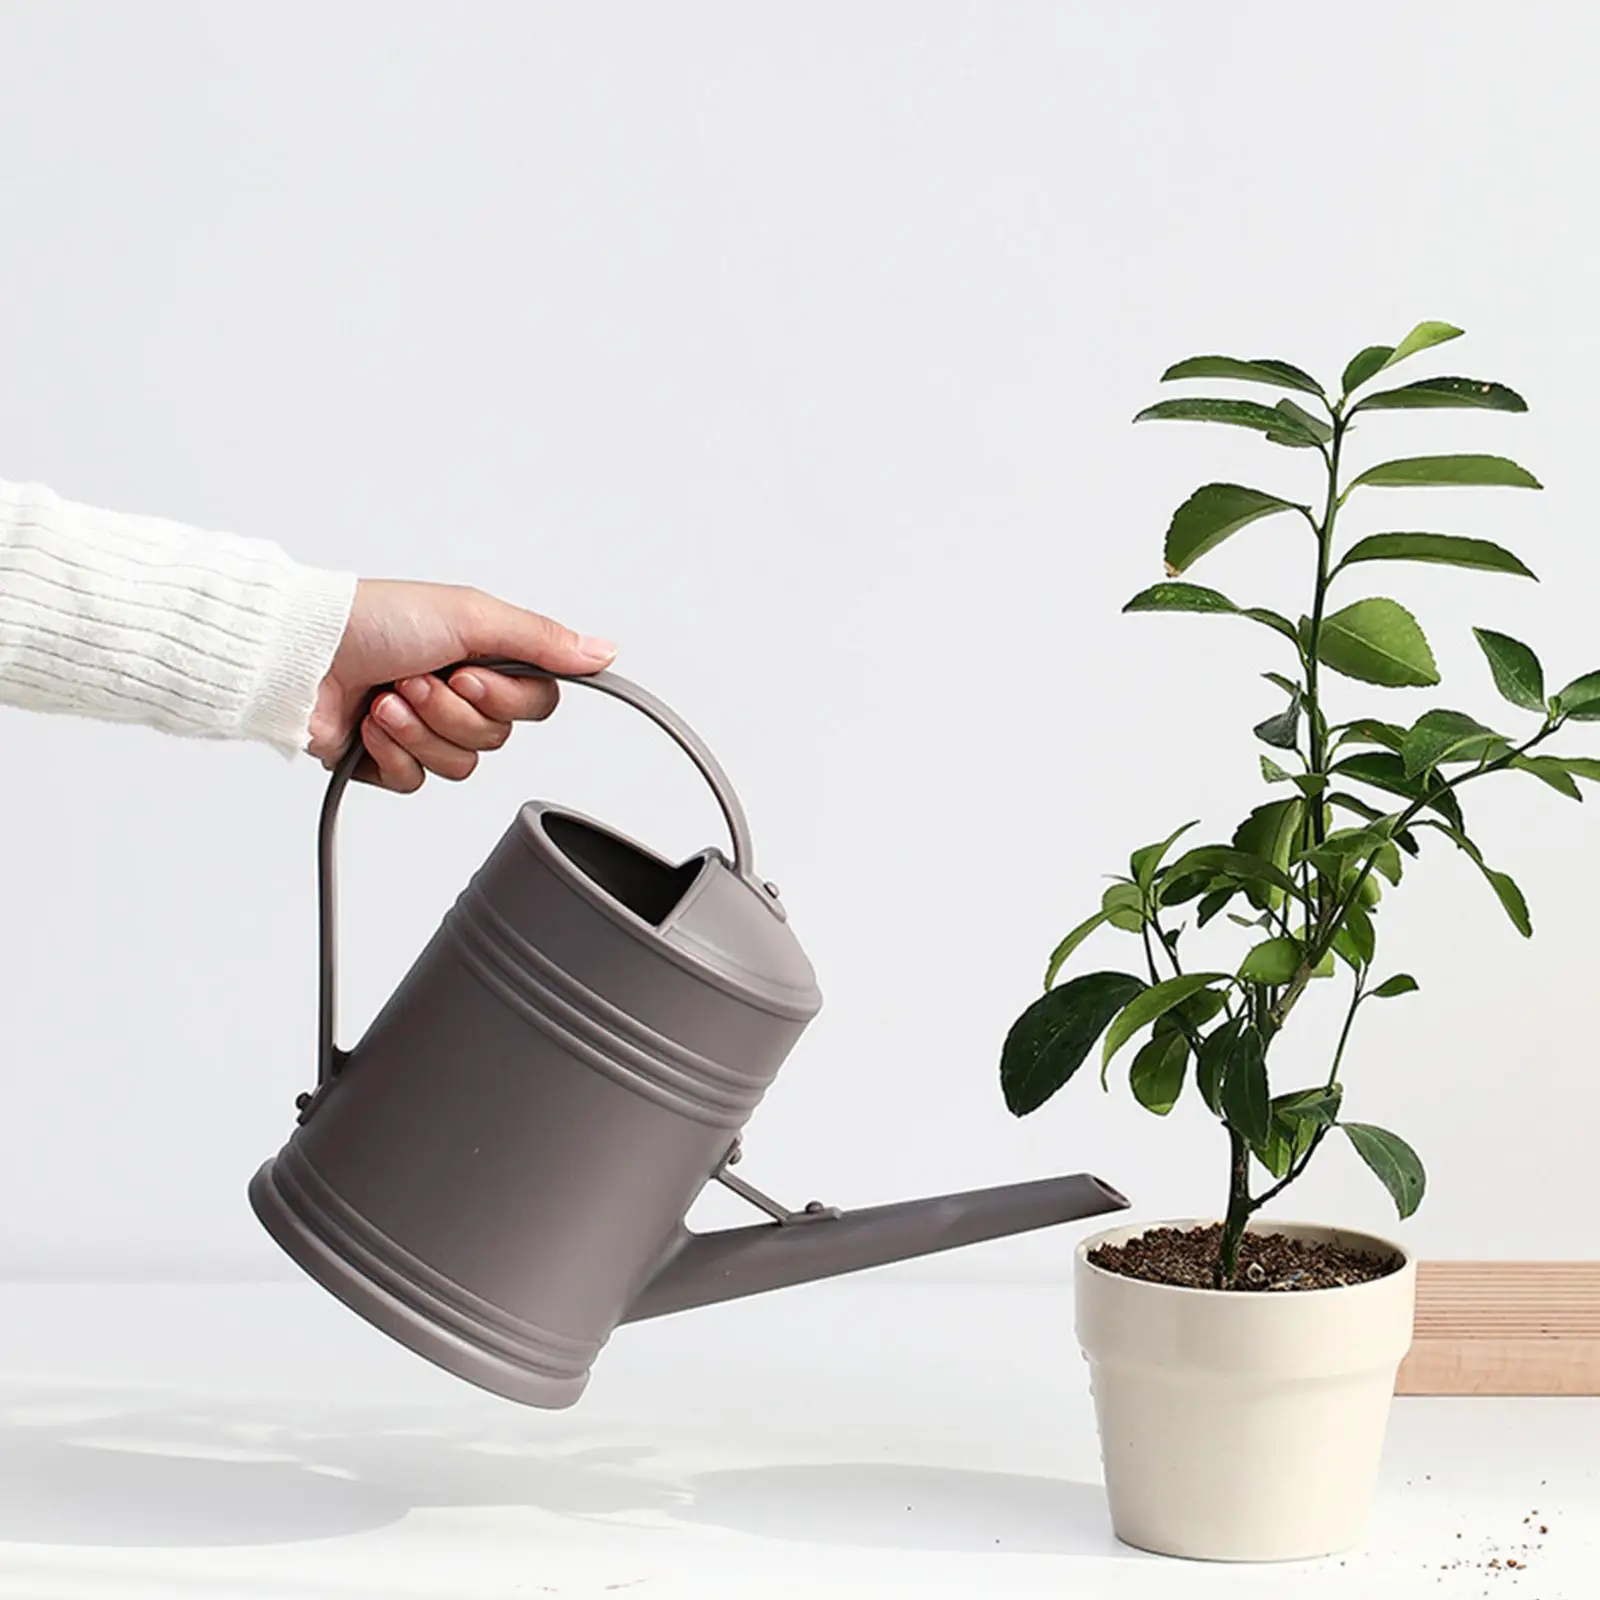 2L Watering Can with Detachable Shower Spray Head, for Indoor Gardening